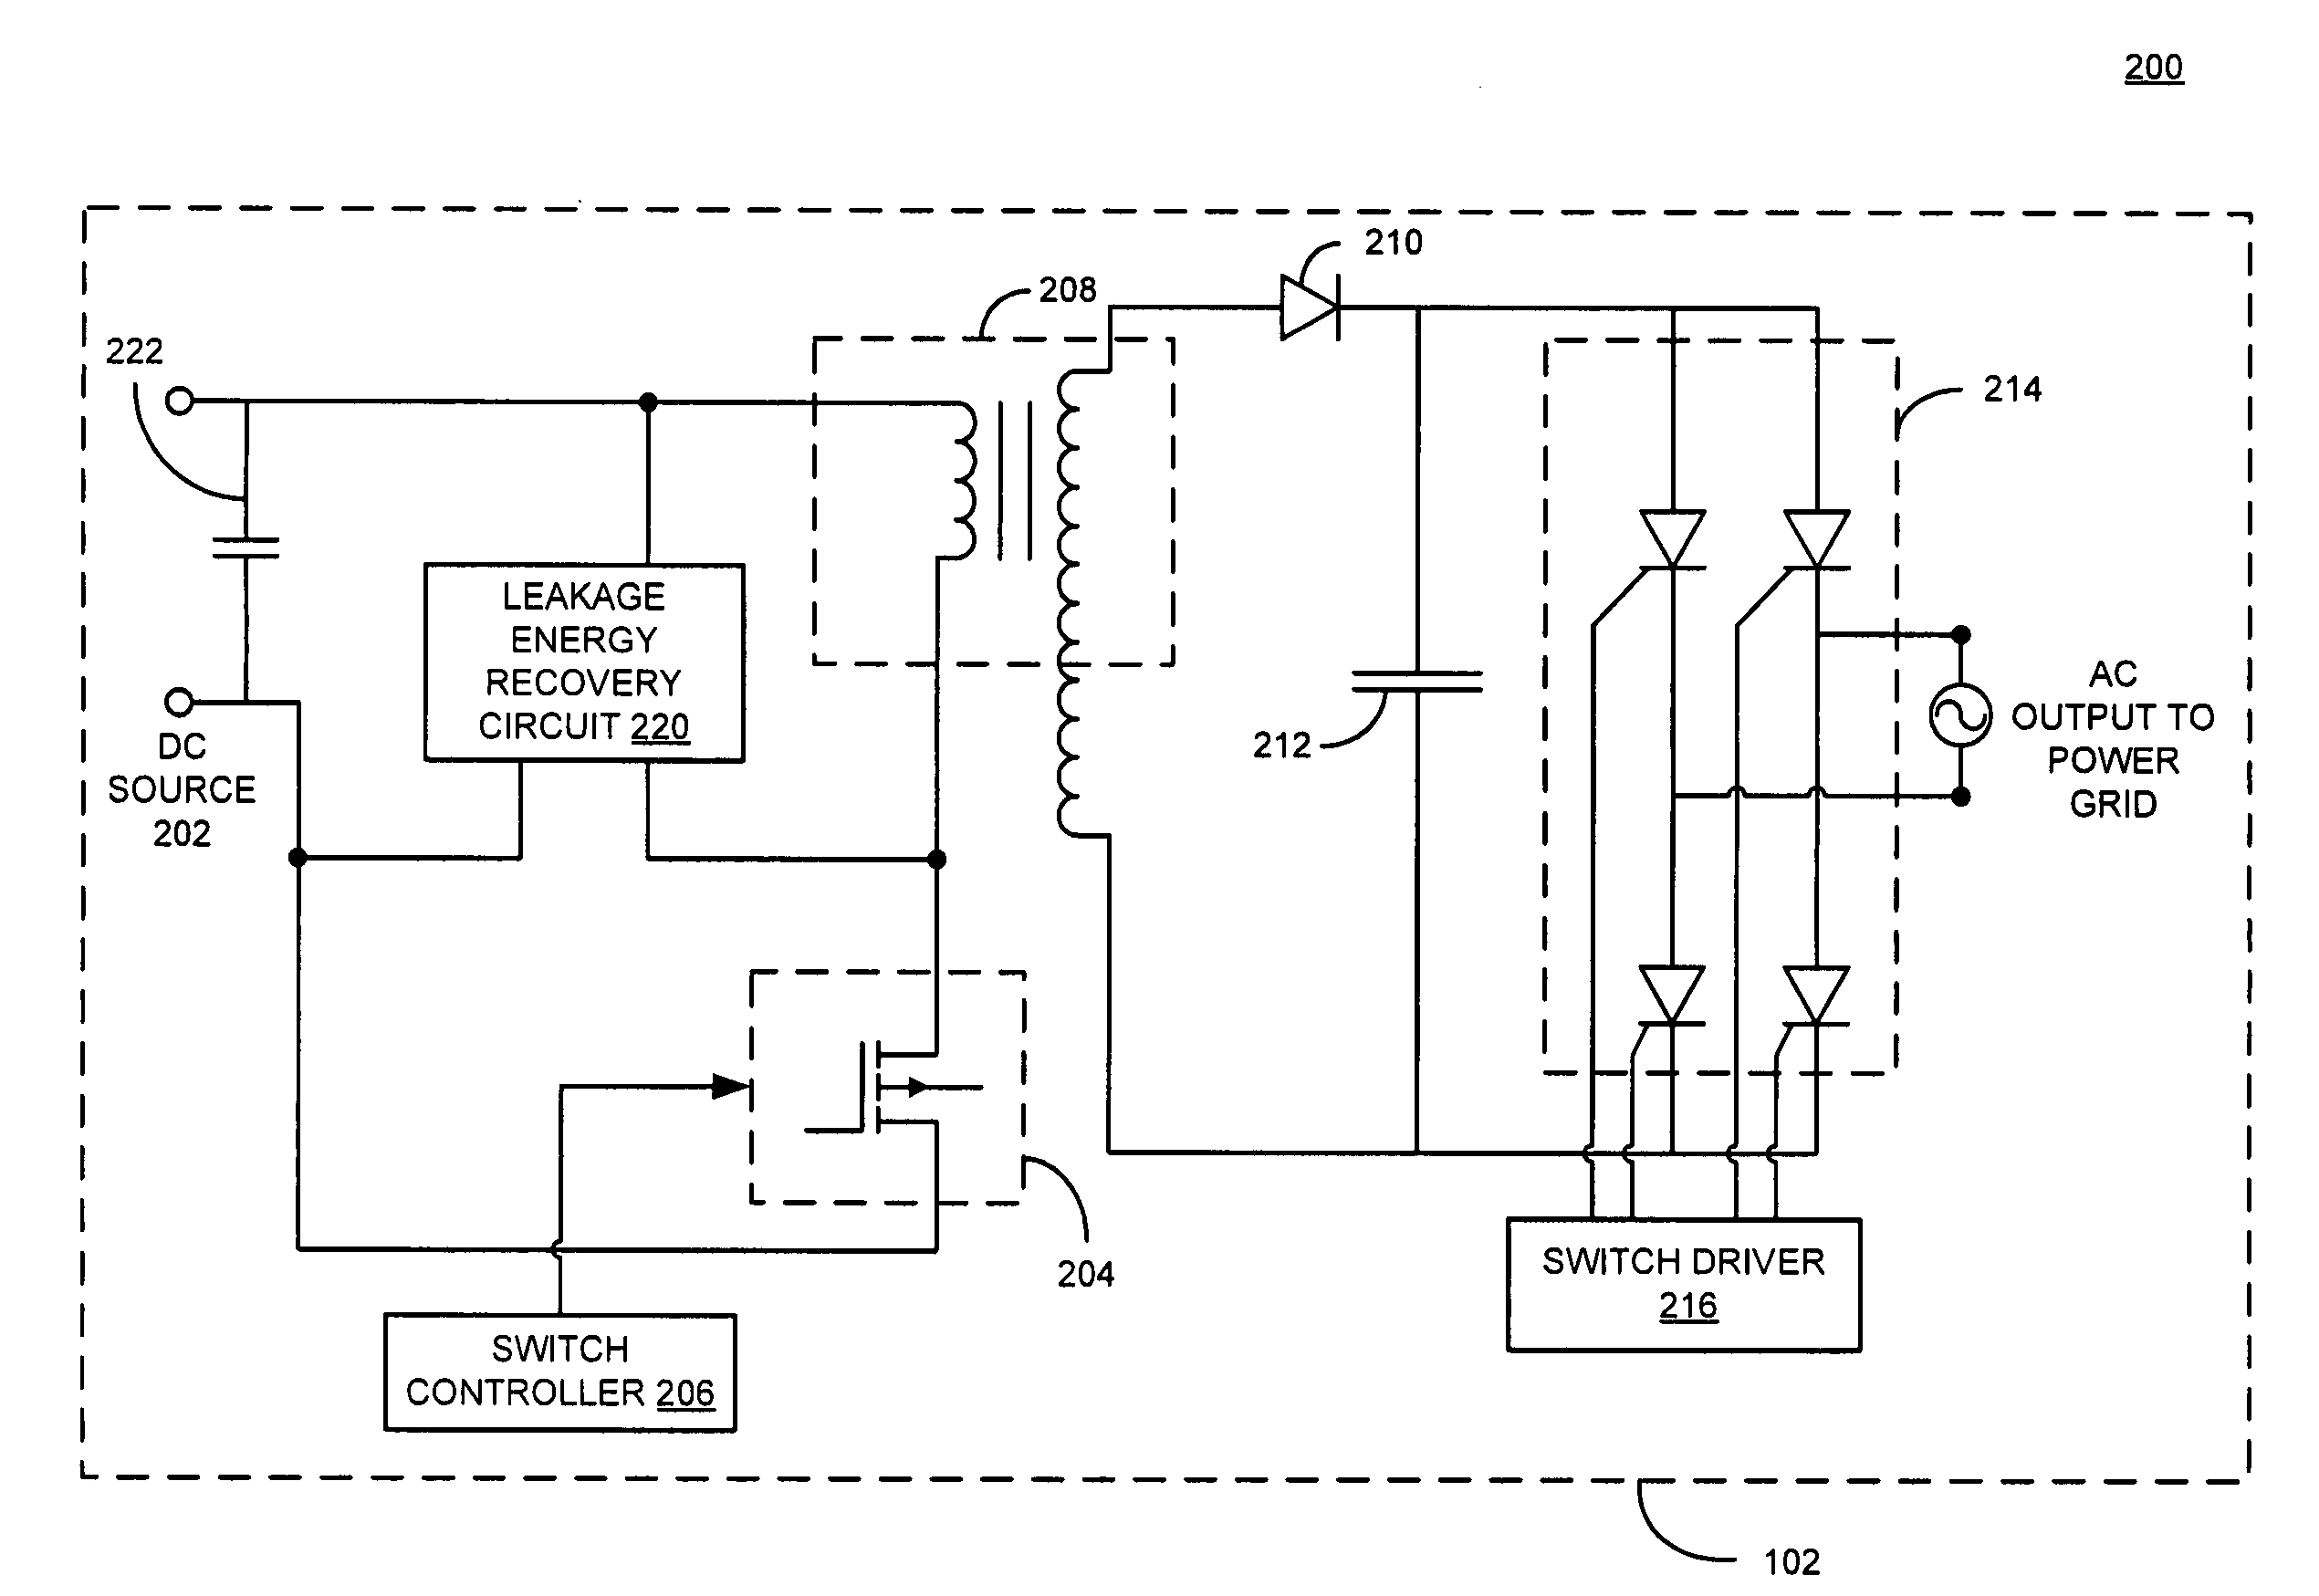 Method and apparatus for a leakage energy recovery circuit